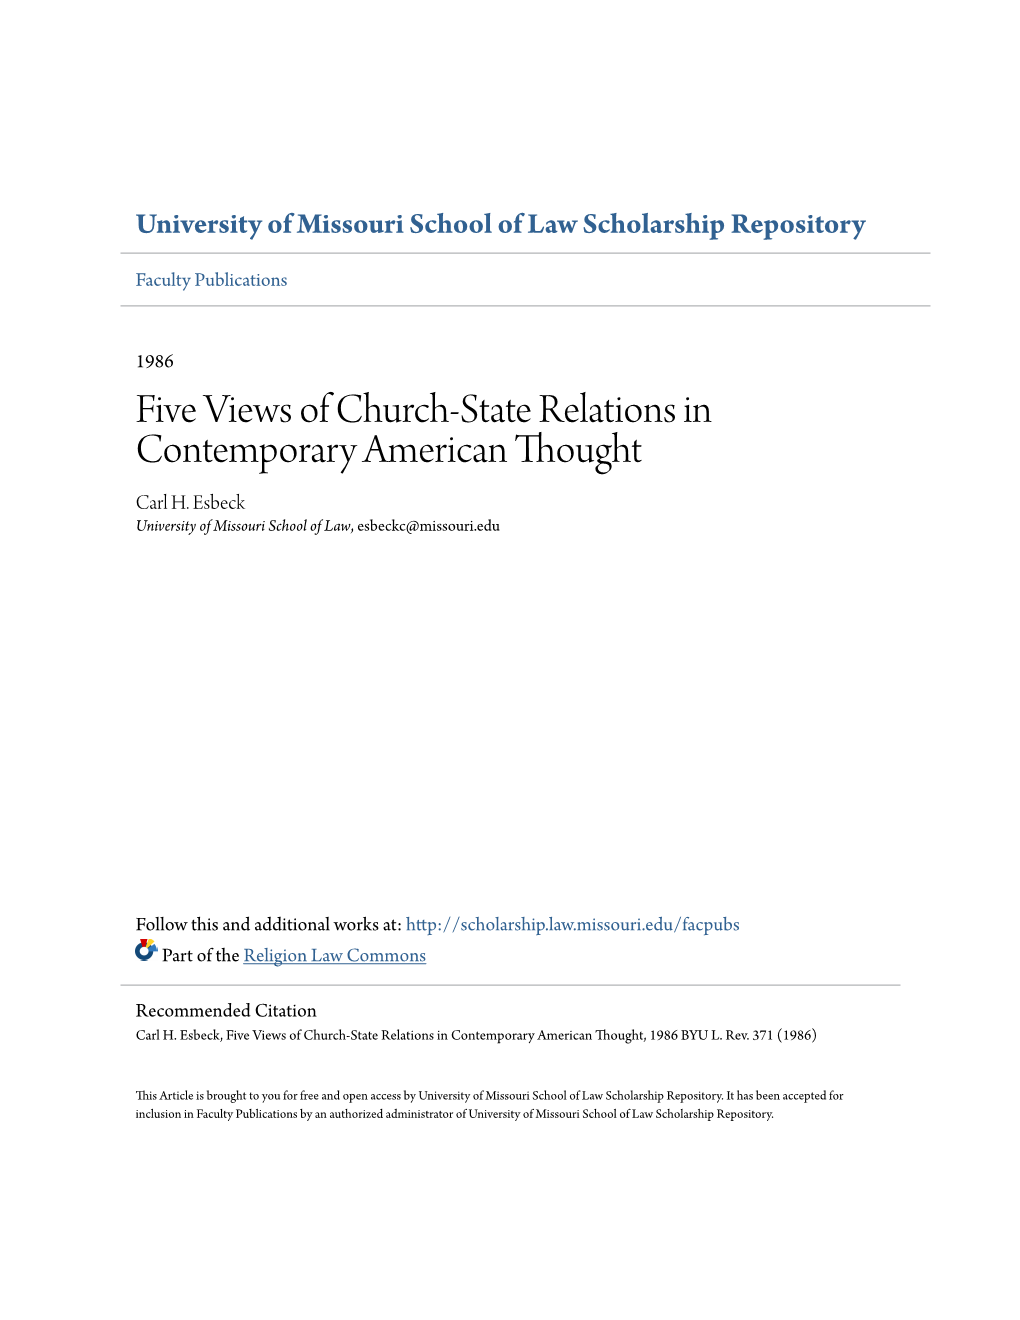 Five Views of Church-State Relations in Contemporary American Thought Carl H